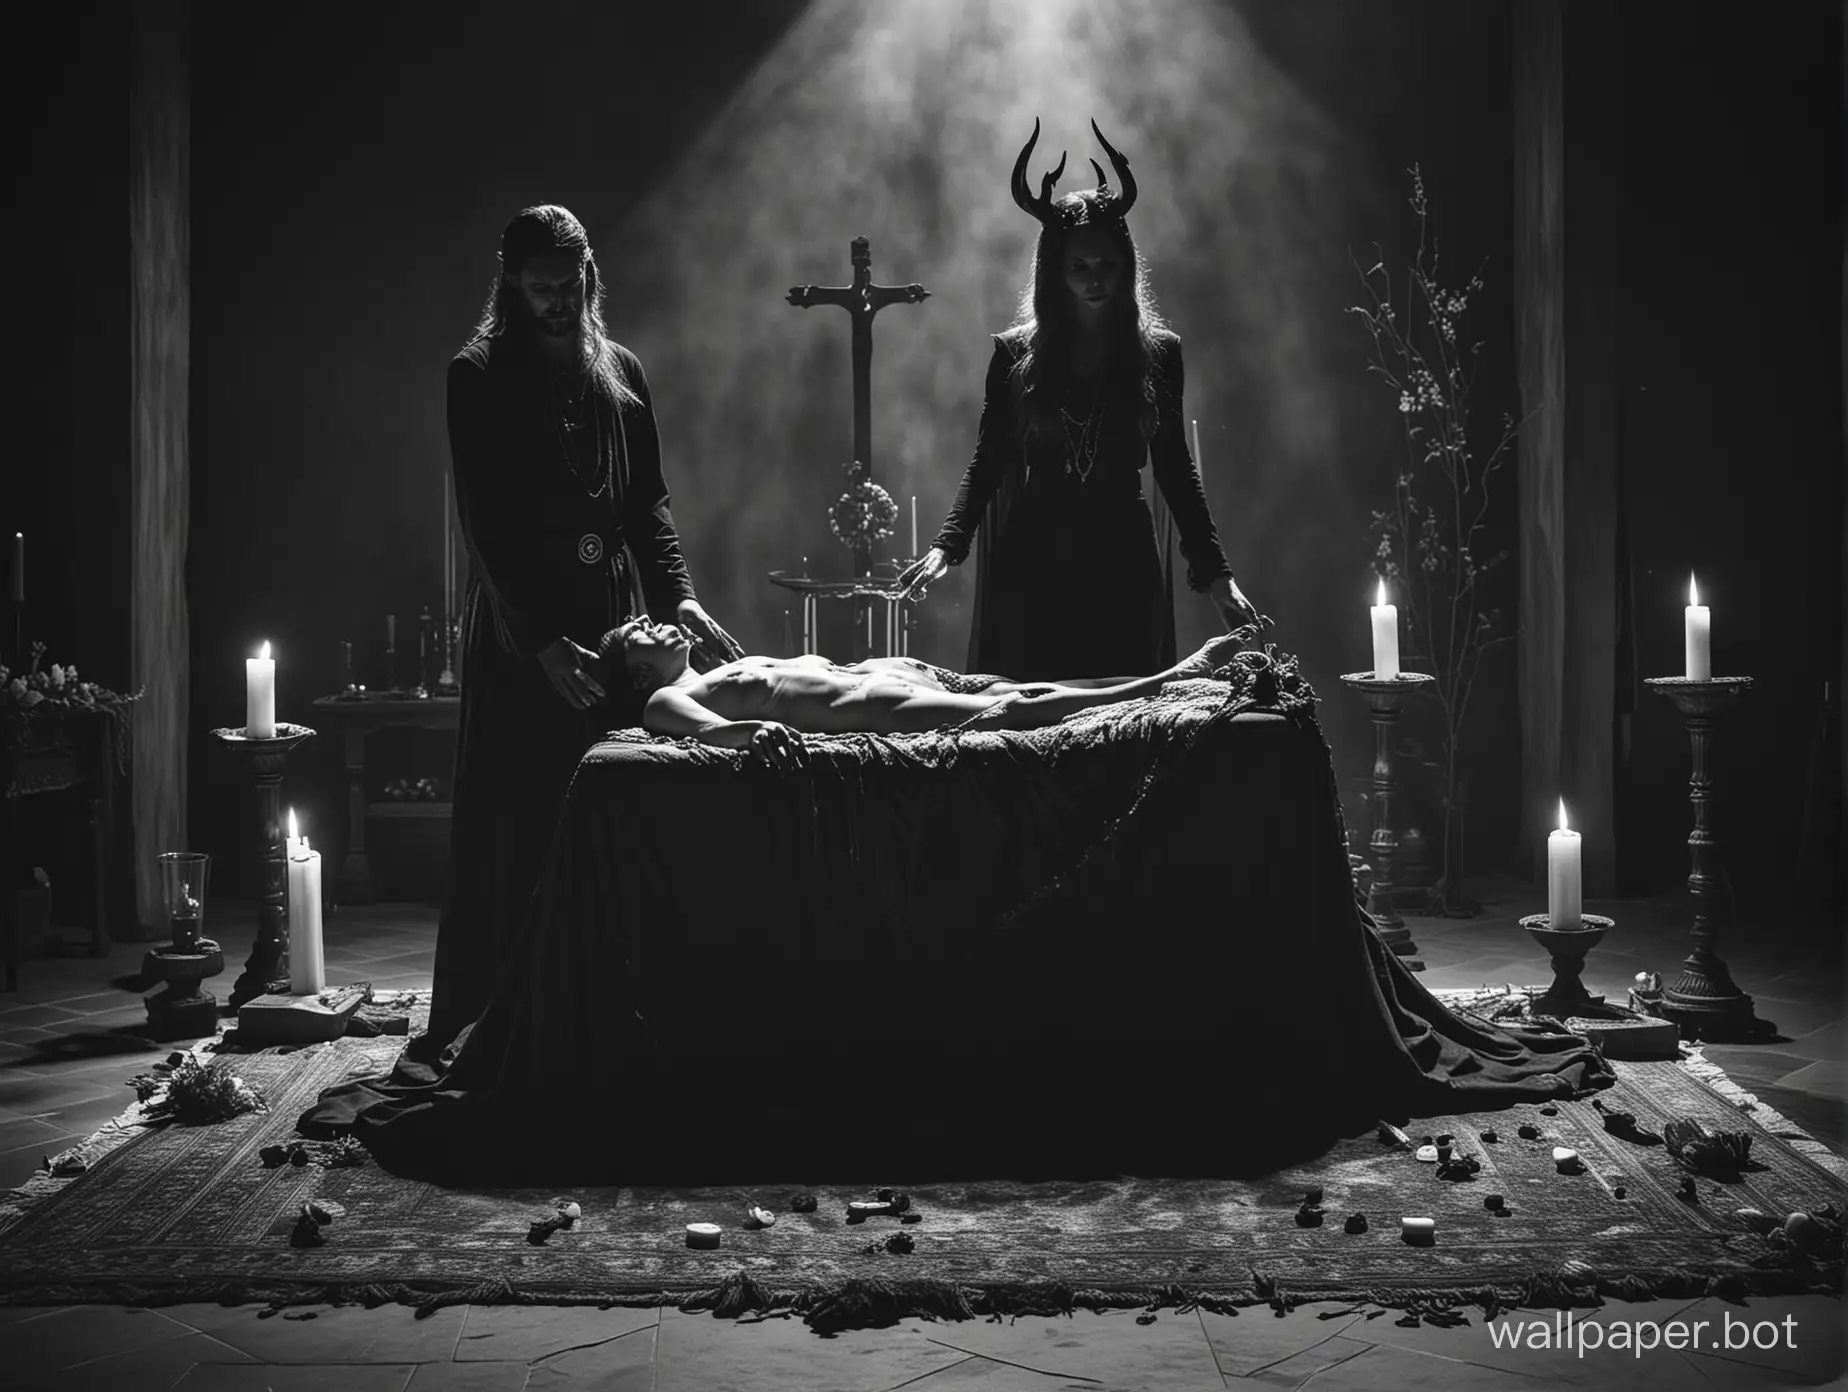 Satanic-Ritual-Woman-Sacrifice-on-Altar-in-High-Contrast-Black-and-White-Photography